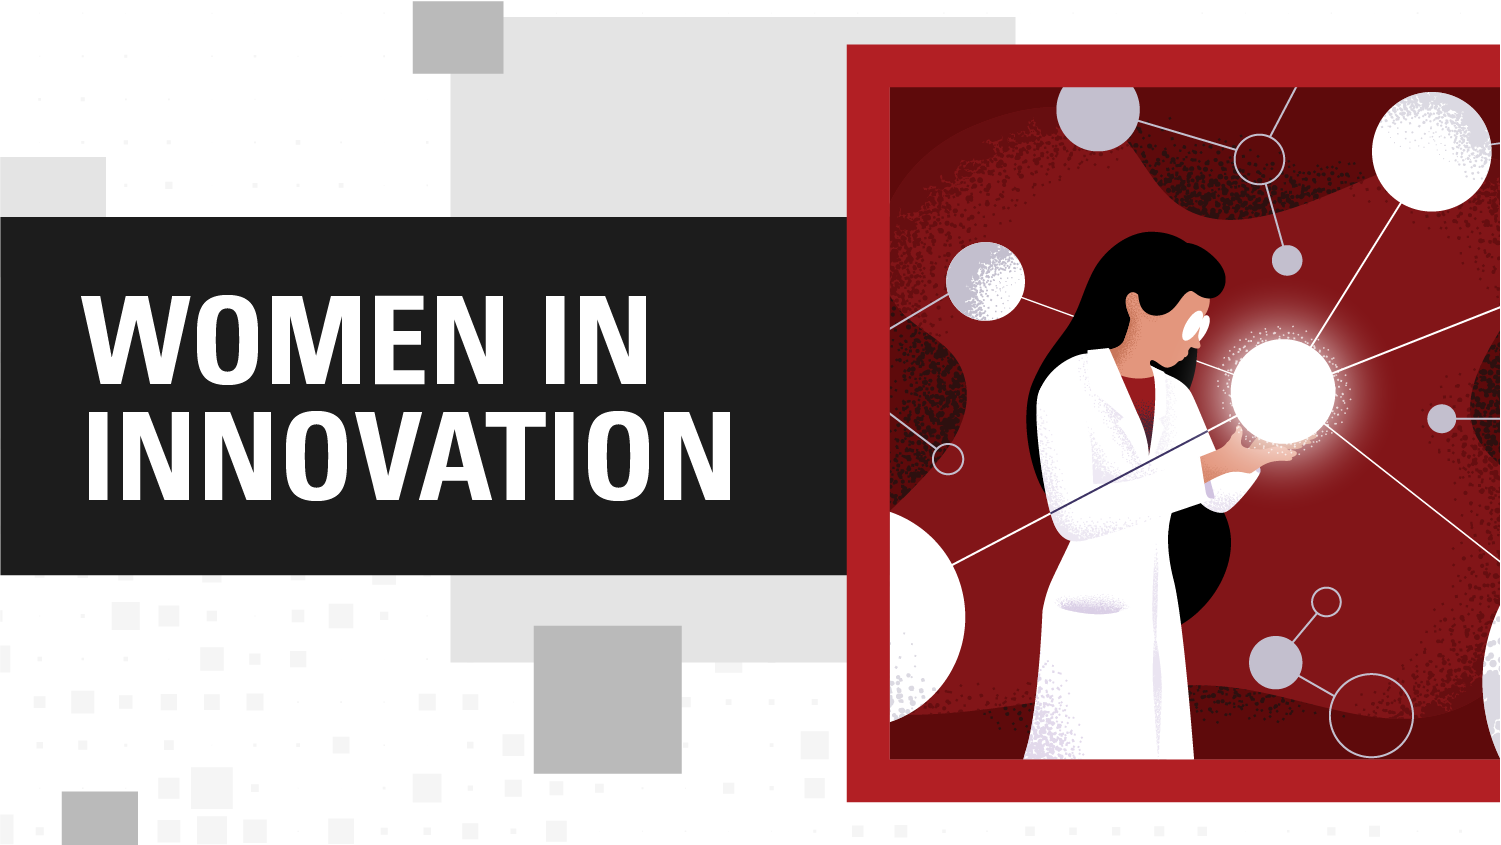 Black, white and red illustration of a female wearing glasses and dressed in white lab coat looking at a white sphere she is holding in her hands. She is facing to the right. To the left, the words "Women in Innovation" are in white on a black background.